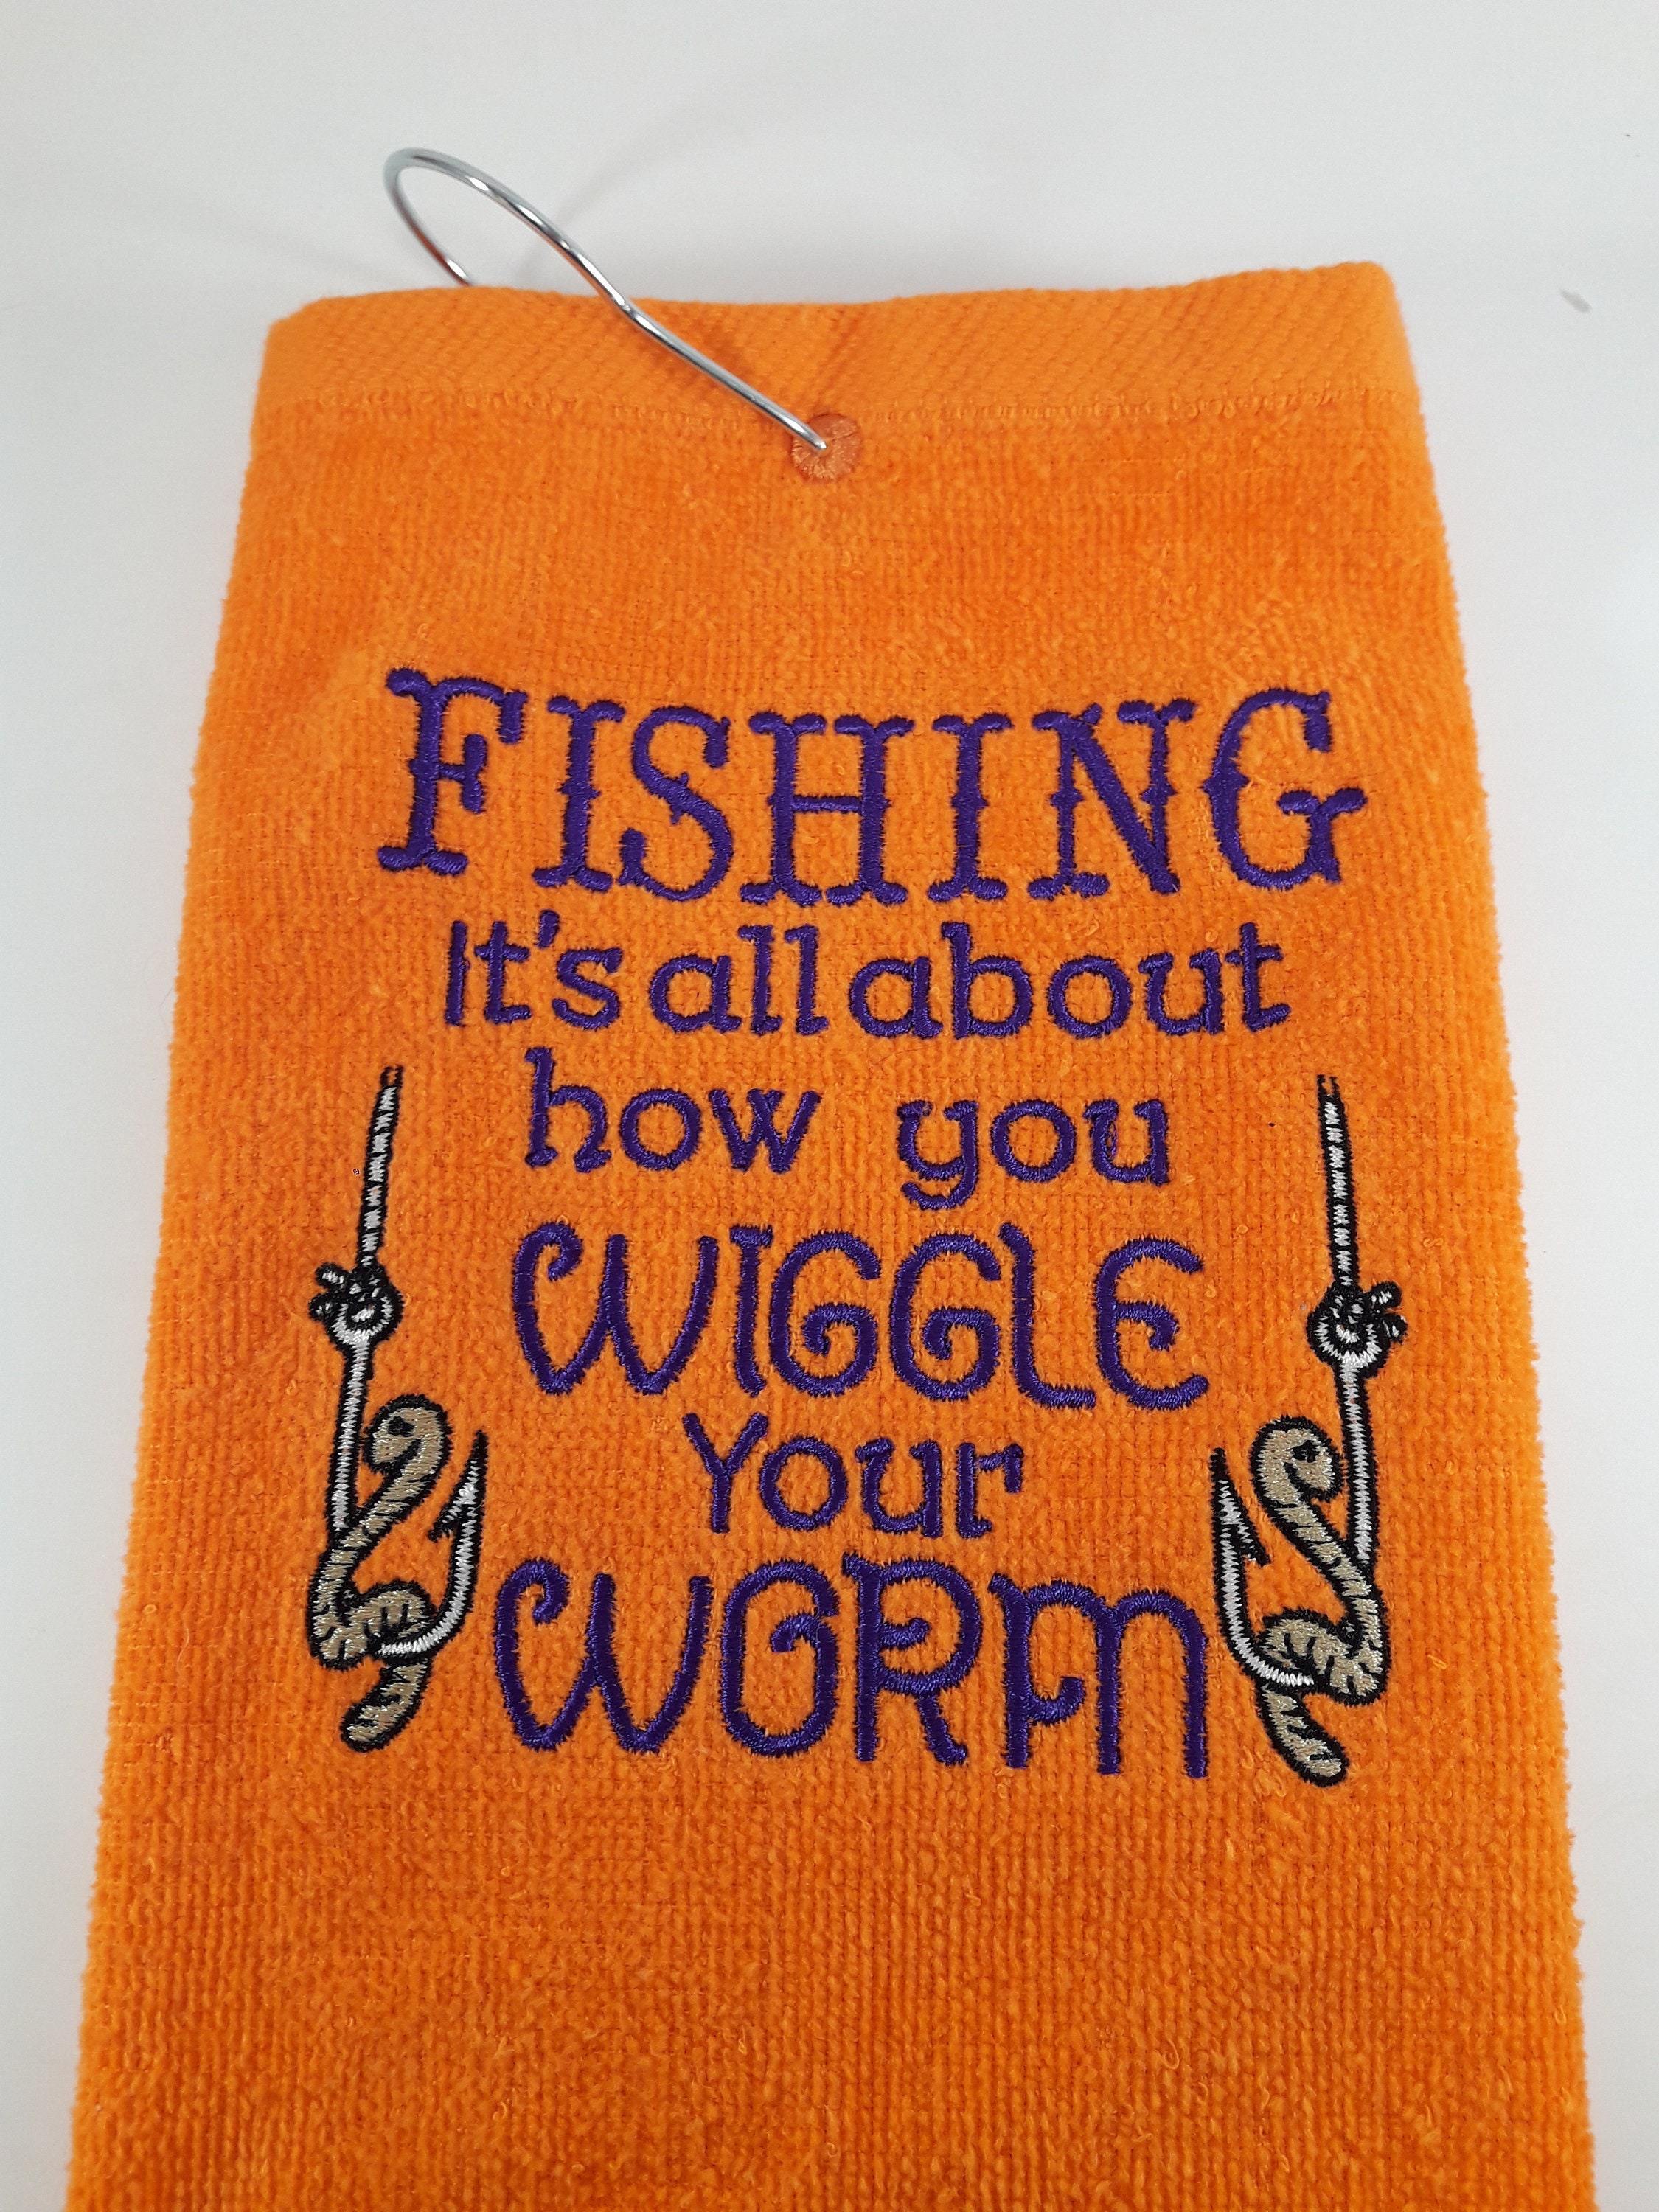 Fishing towel gift wiggle your worm. Embroidered personalized for